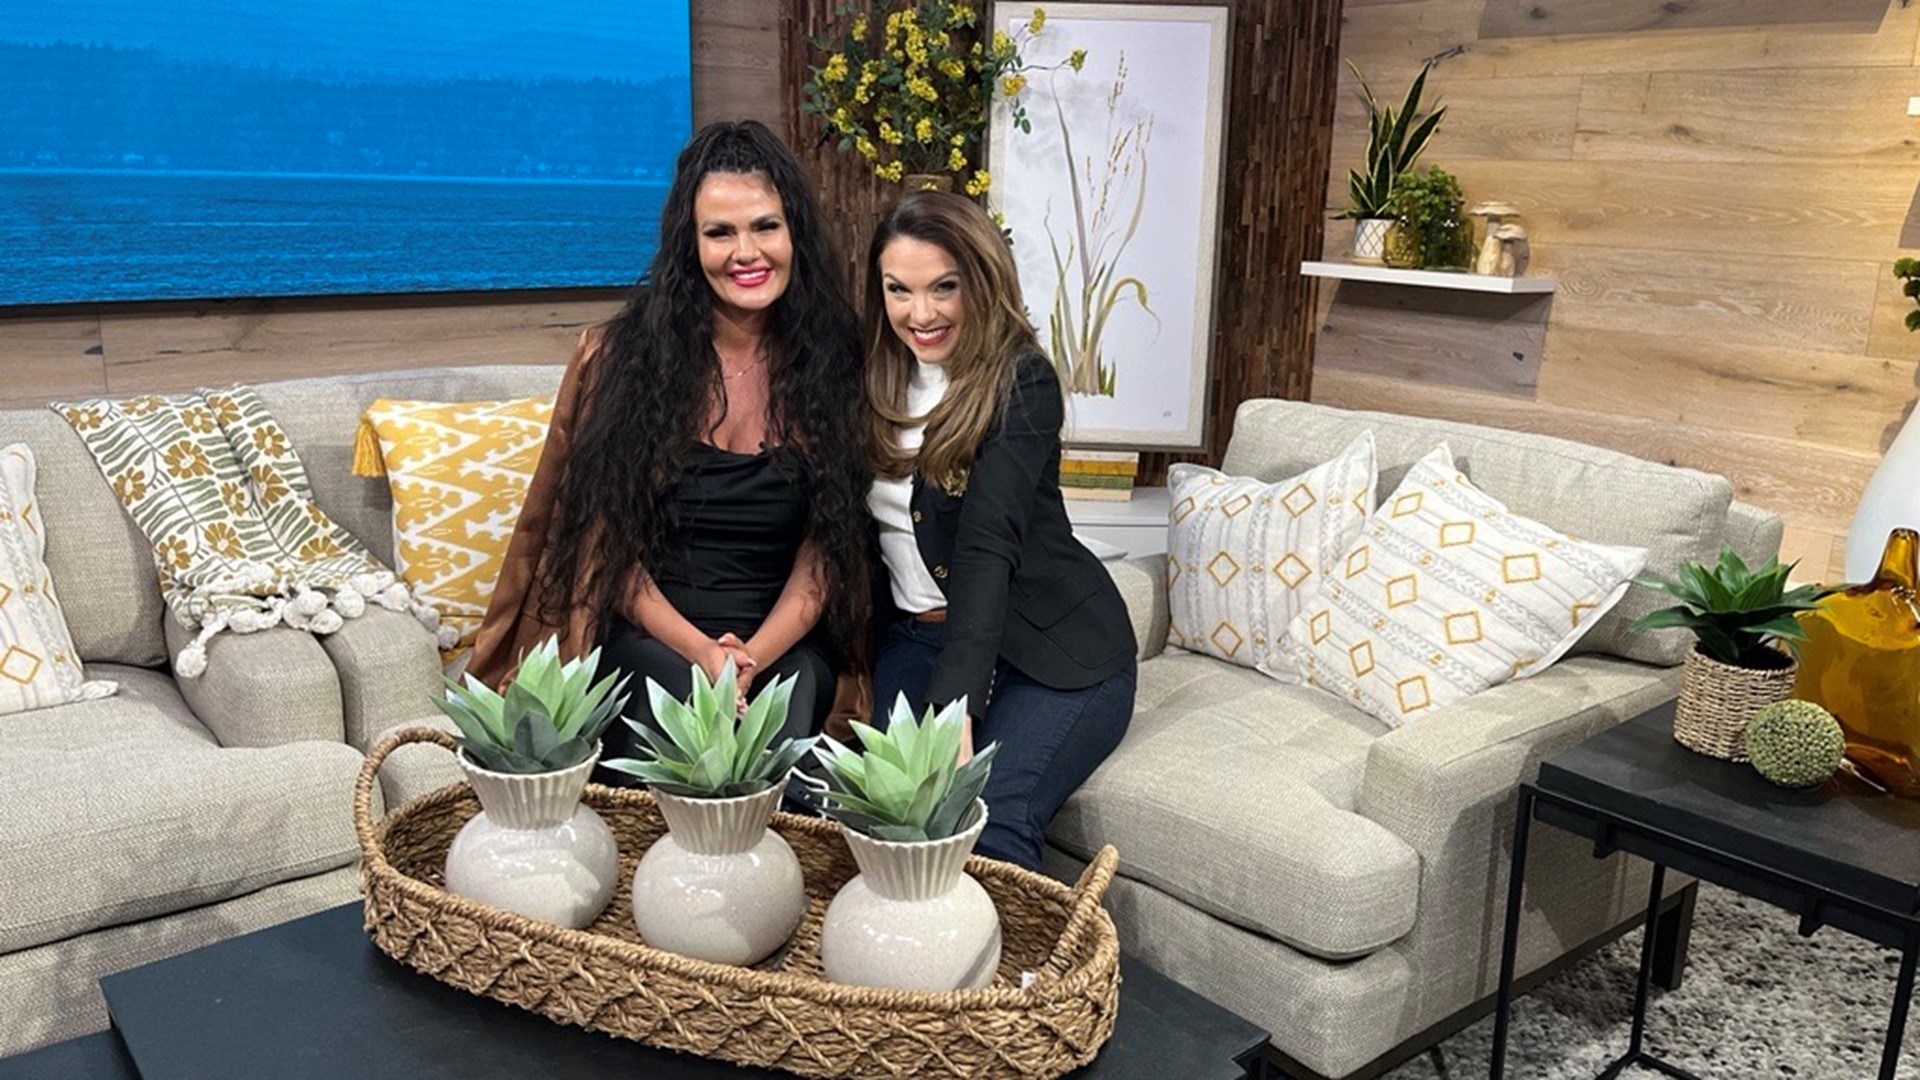 Angelina Murphy from Angelina's Hair Studio explains why clip-in extensions are helpful and announces the launch of her new clip-in extension line, Sheba. #newdaynw